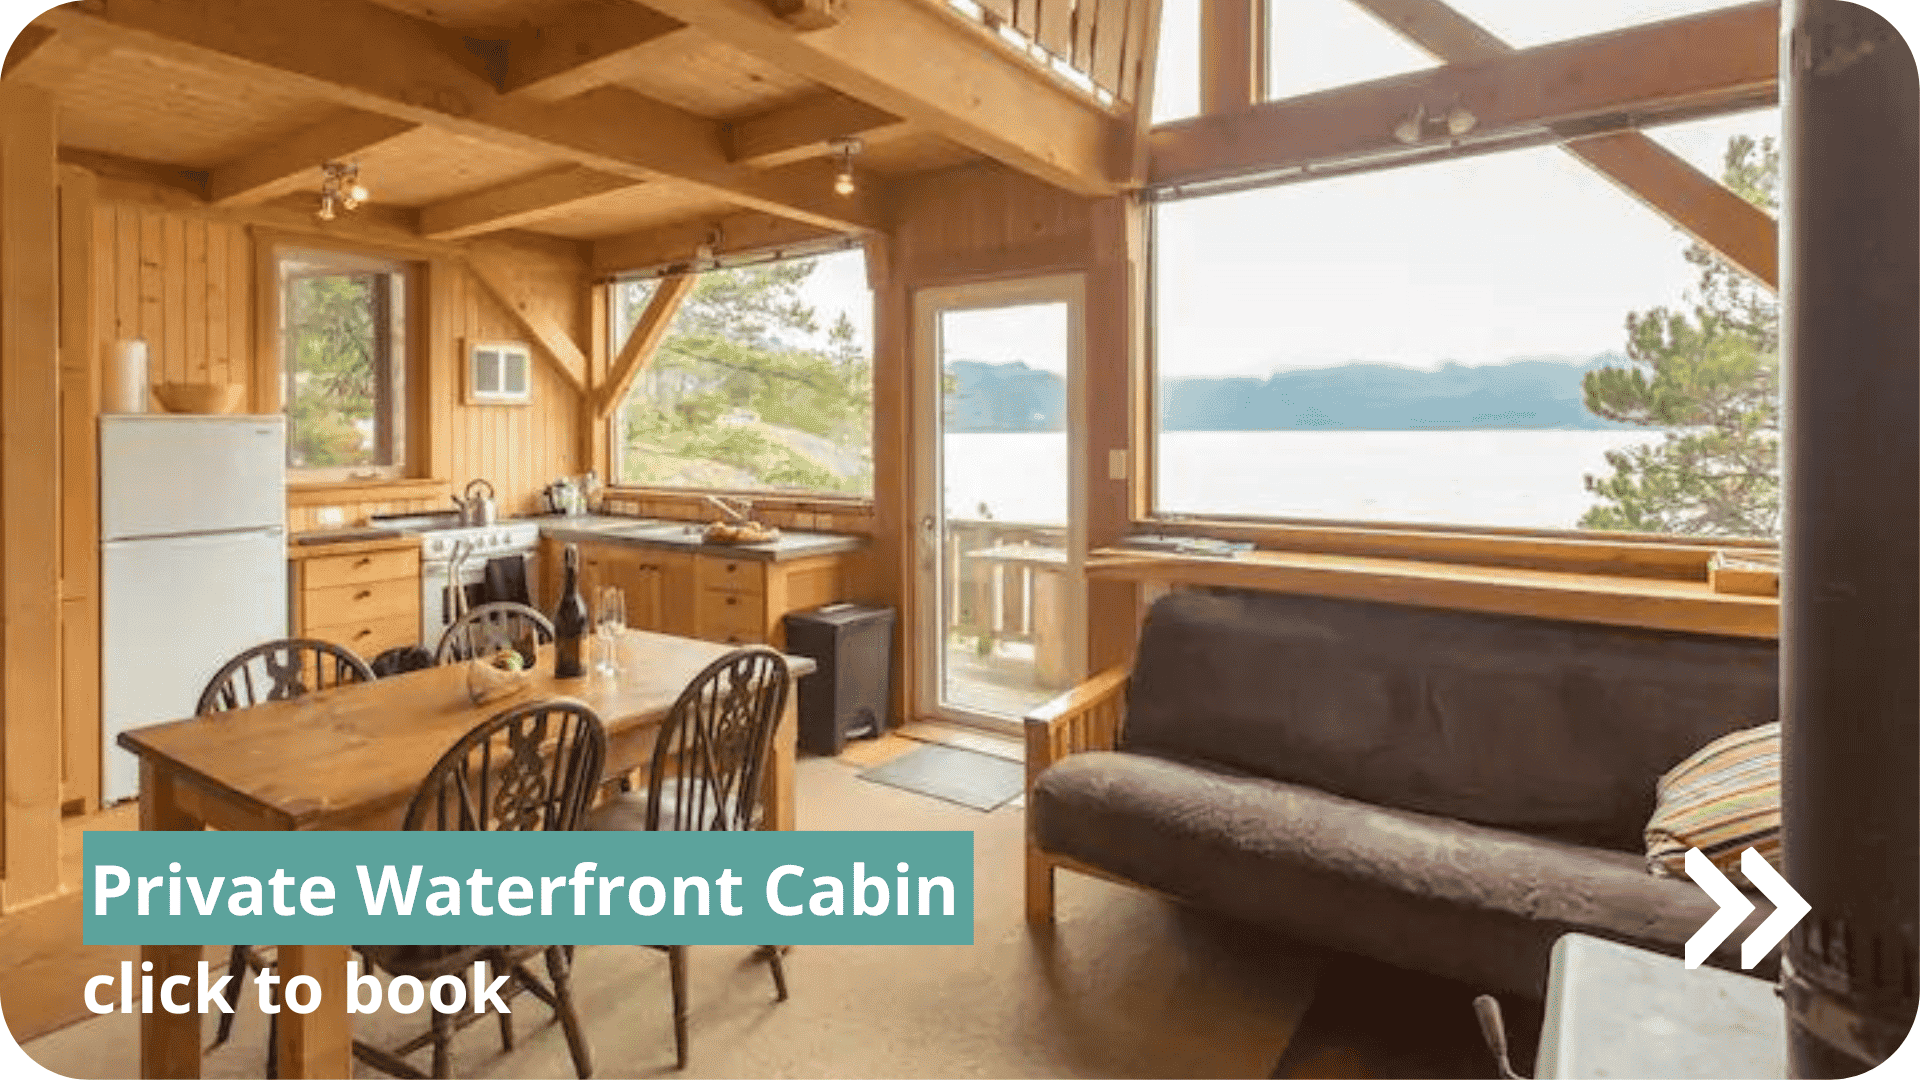 Private Waterfront Cabin in Squamish